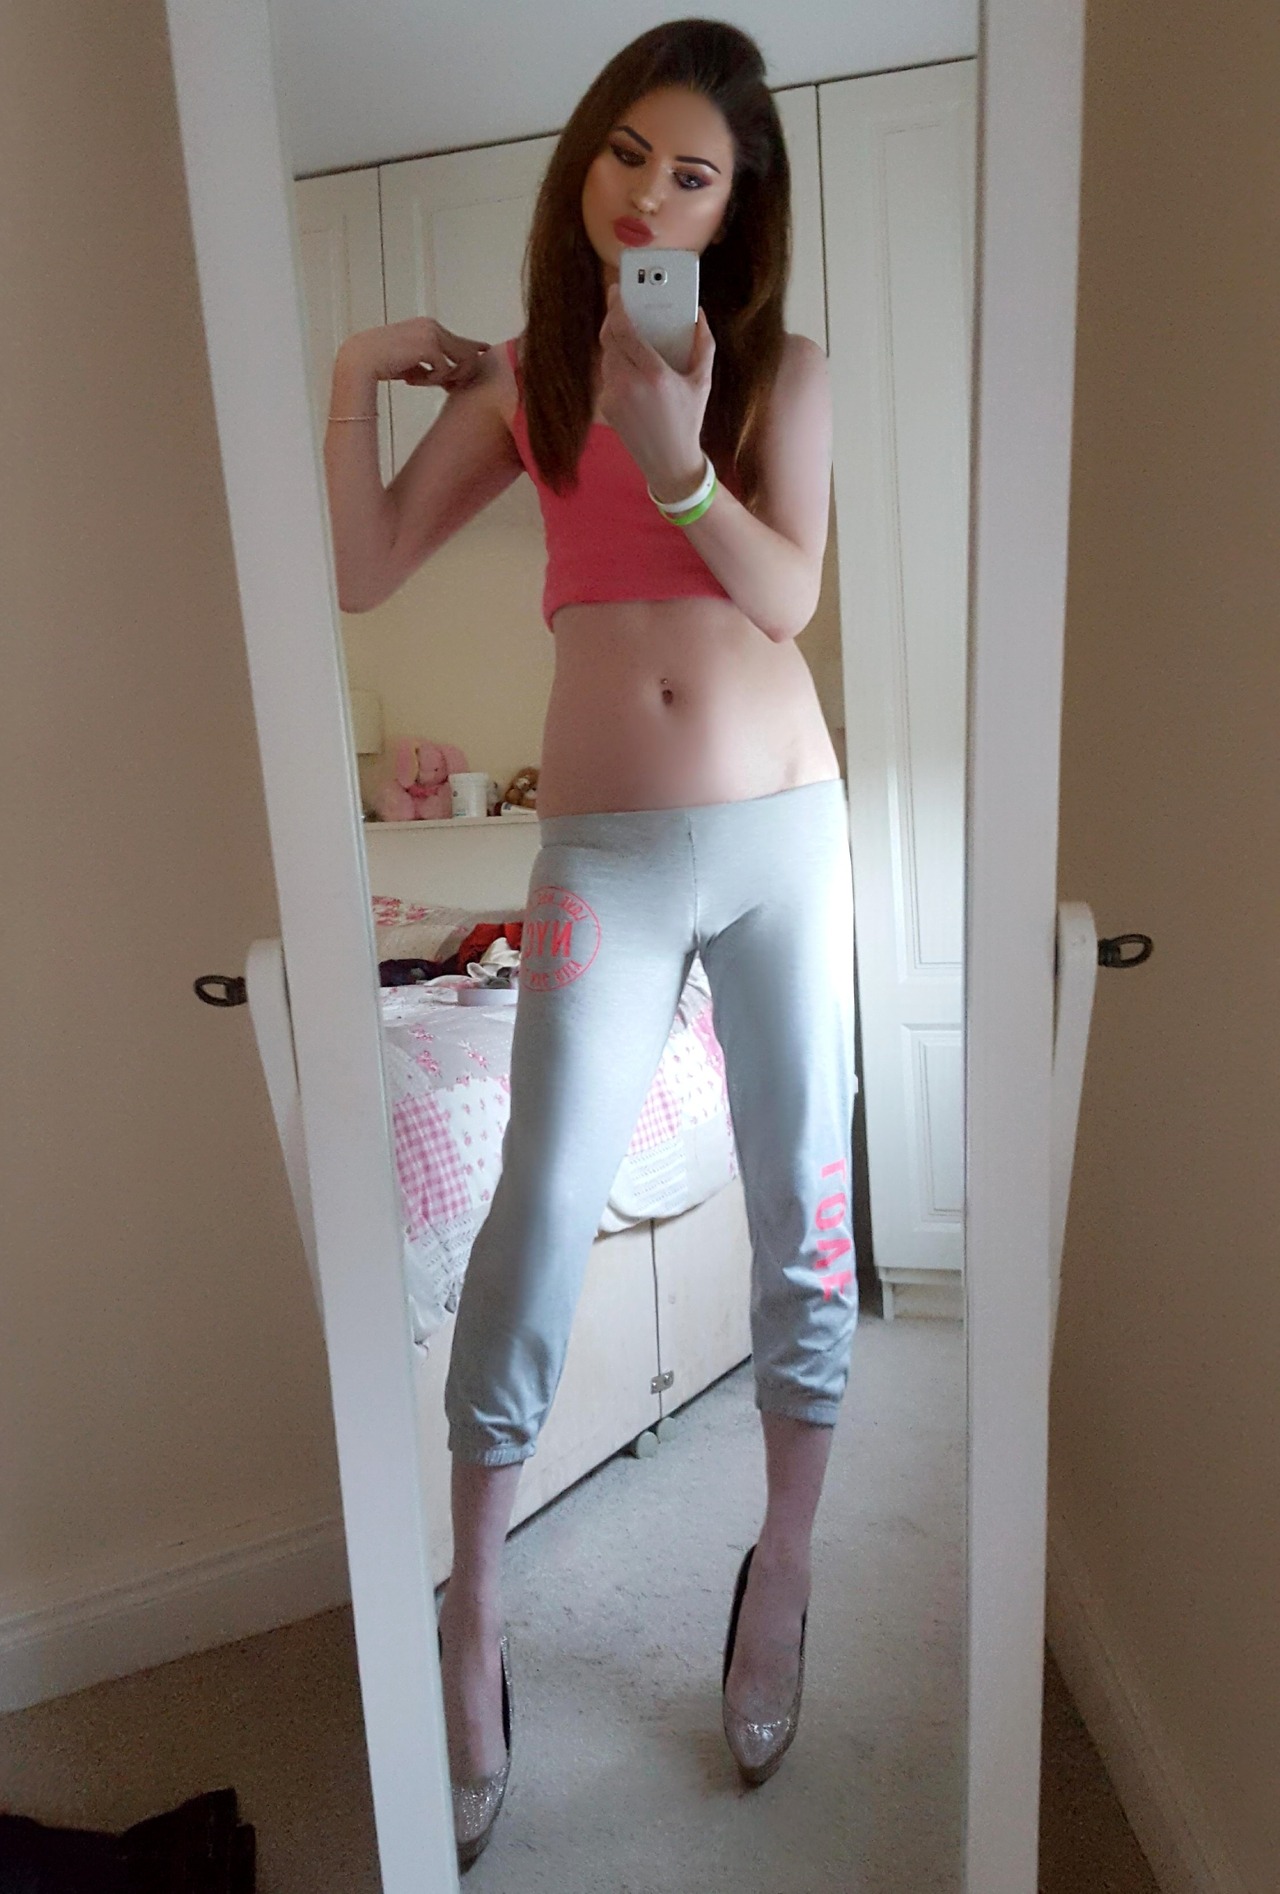 TS pennylittlekitten Sporty outfit with high heels on lolz